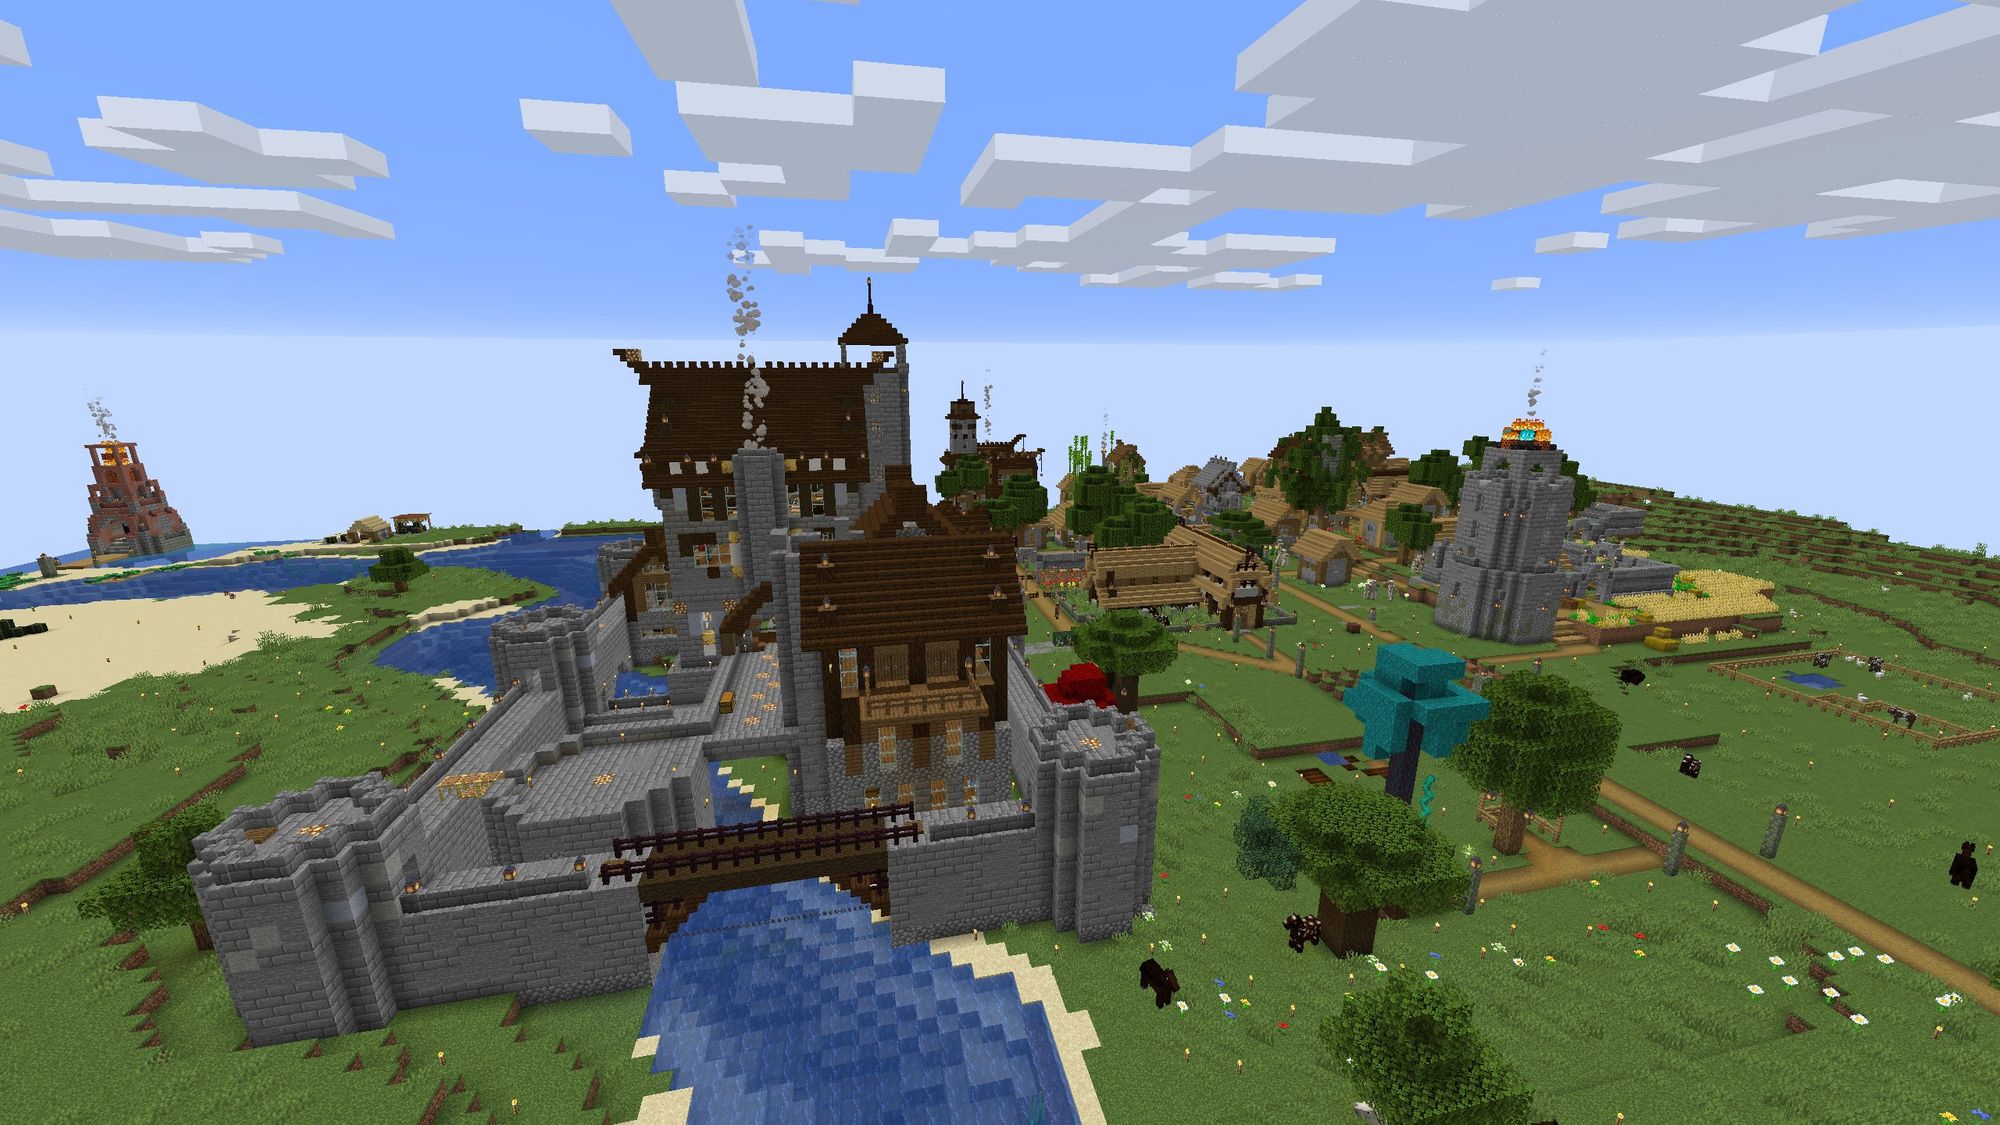 A second photo of a landscape of my Minecraft server, showing a castle under construction in the foreground.